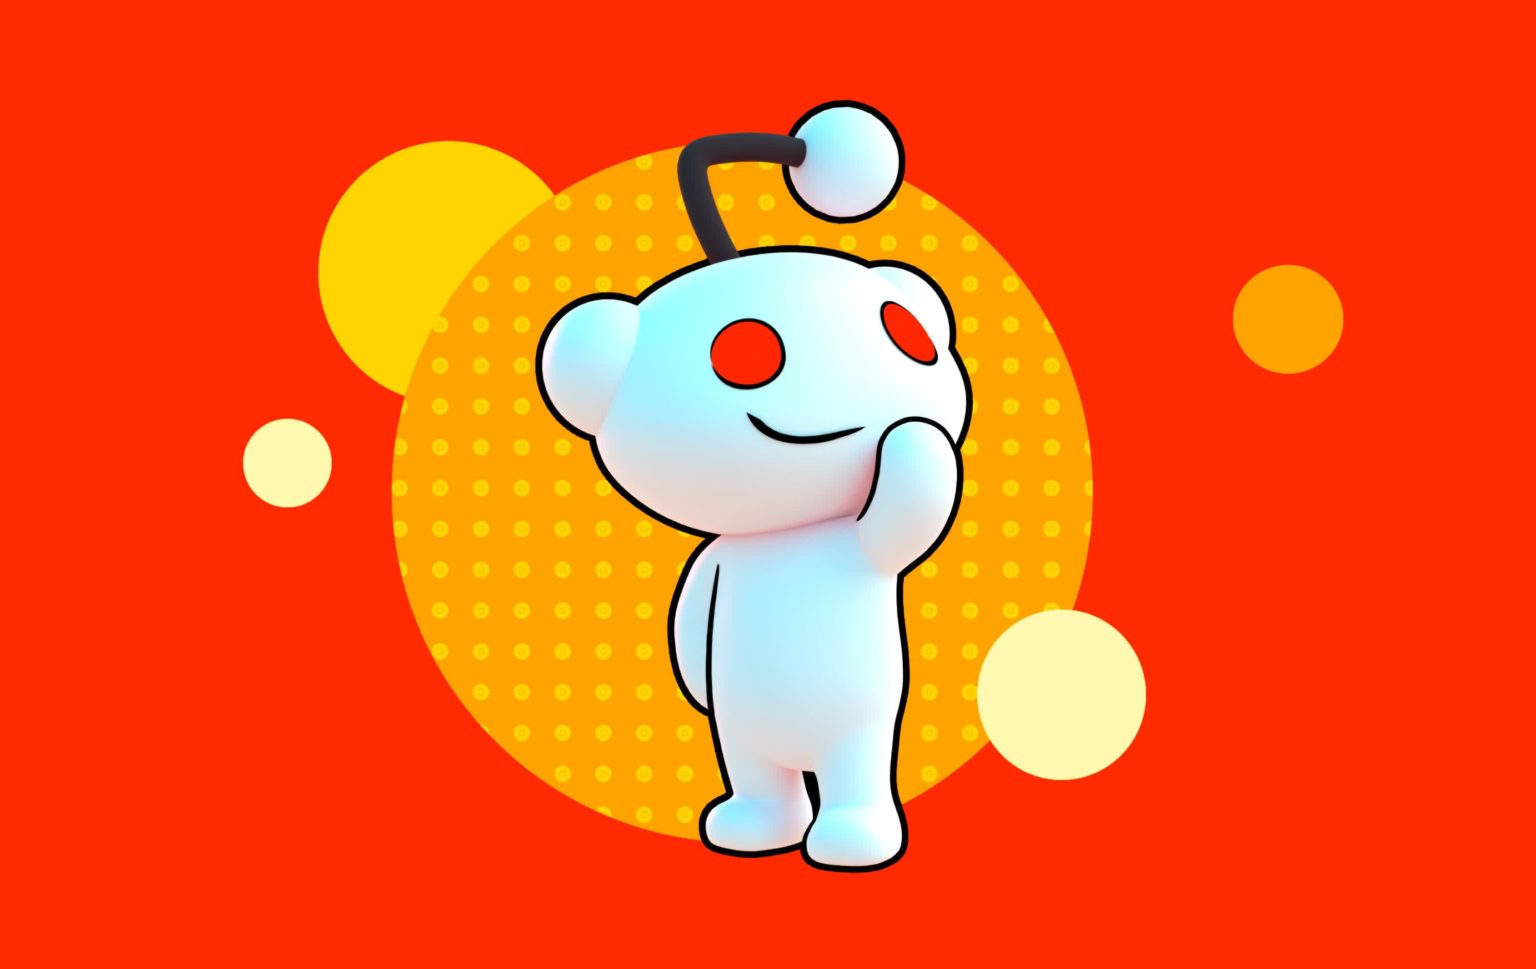 As Reddit prepares for IPO, sale of user generated content draws FTC